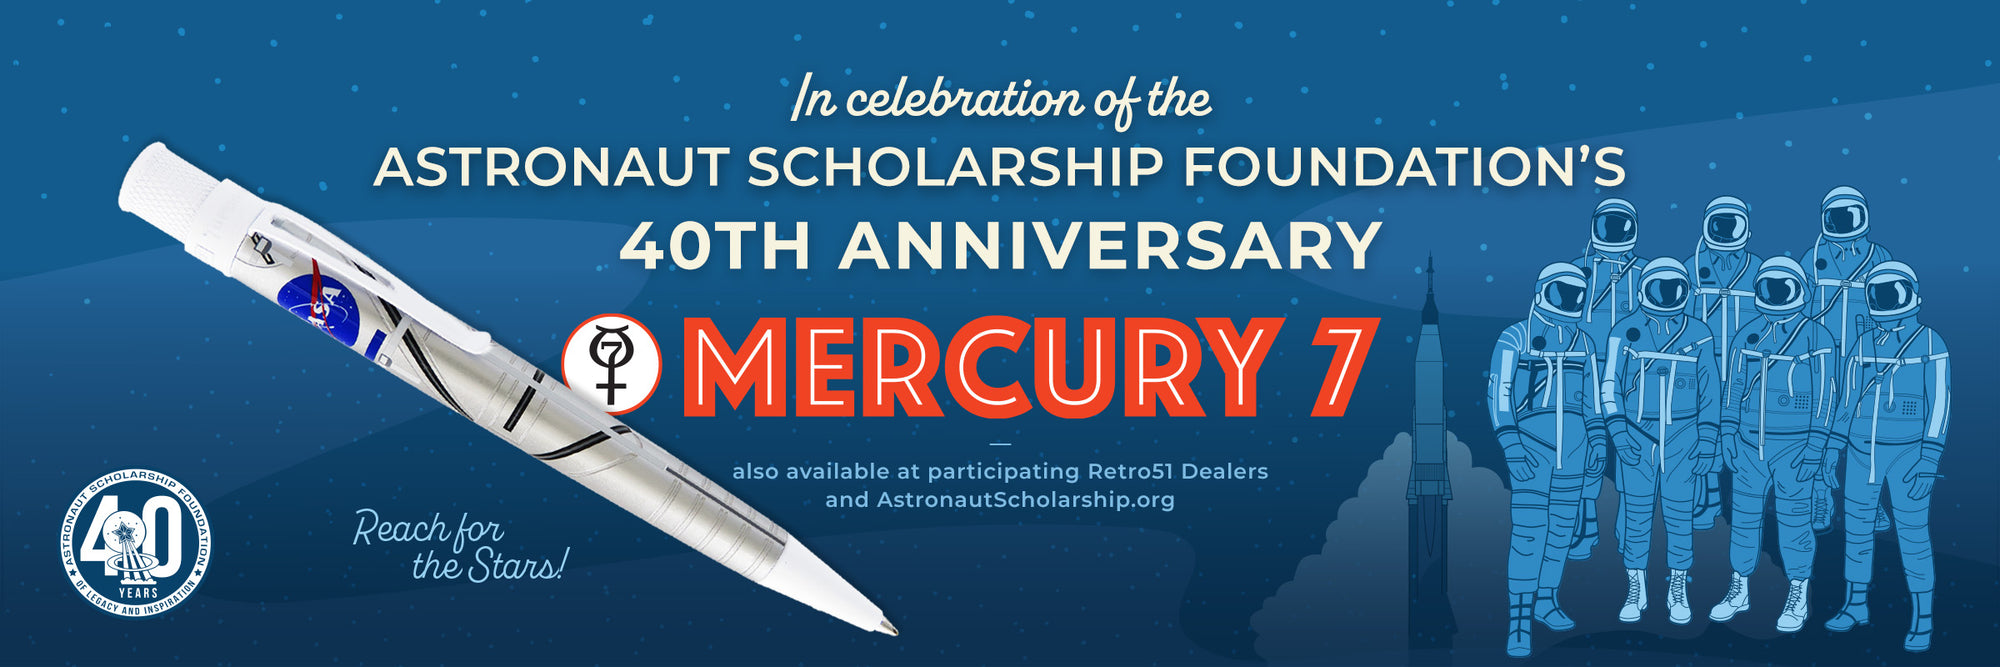 In celebration of the ASF 40th Anniversary - Mercury 7